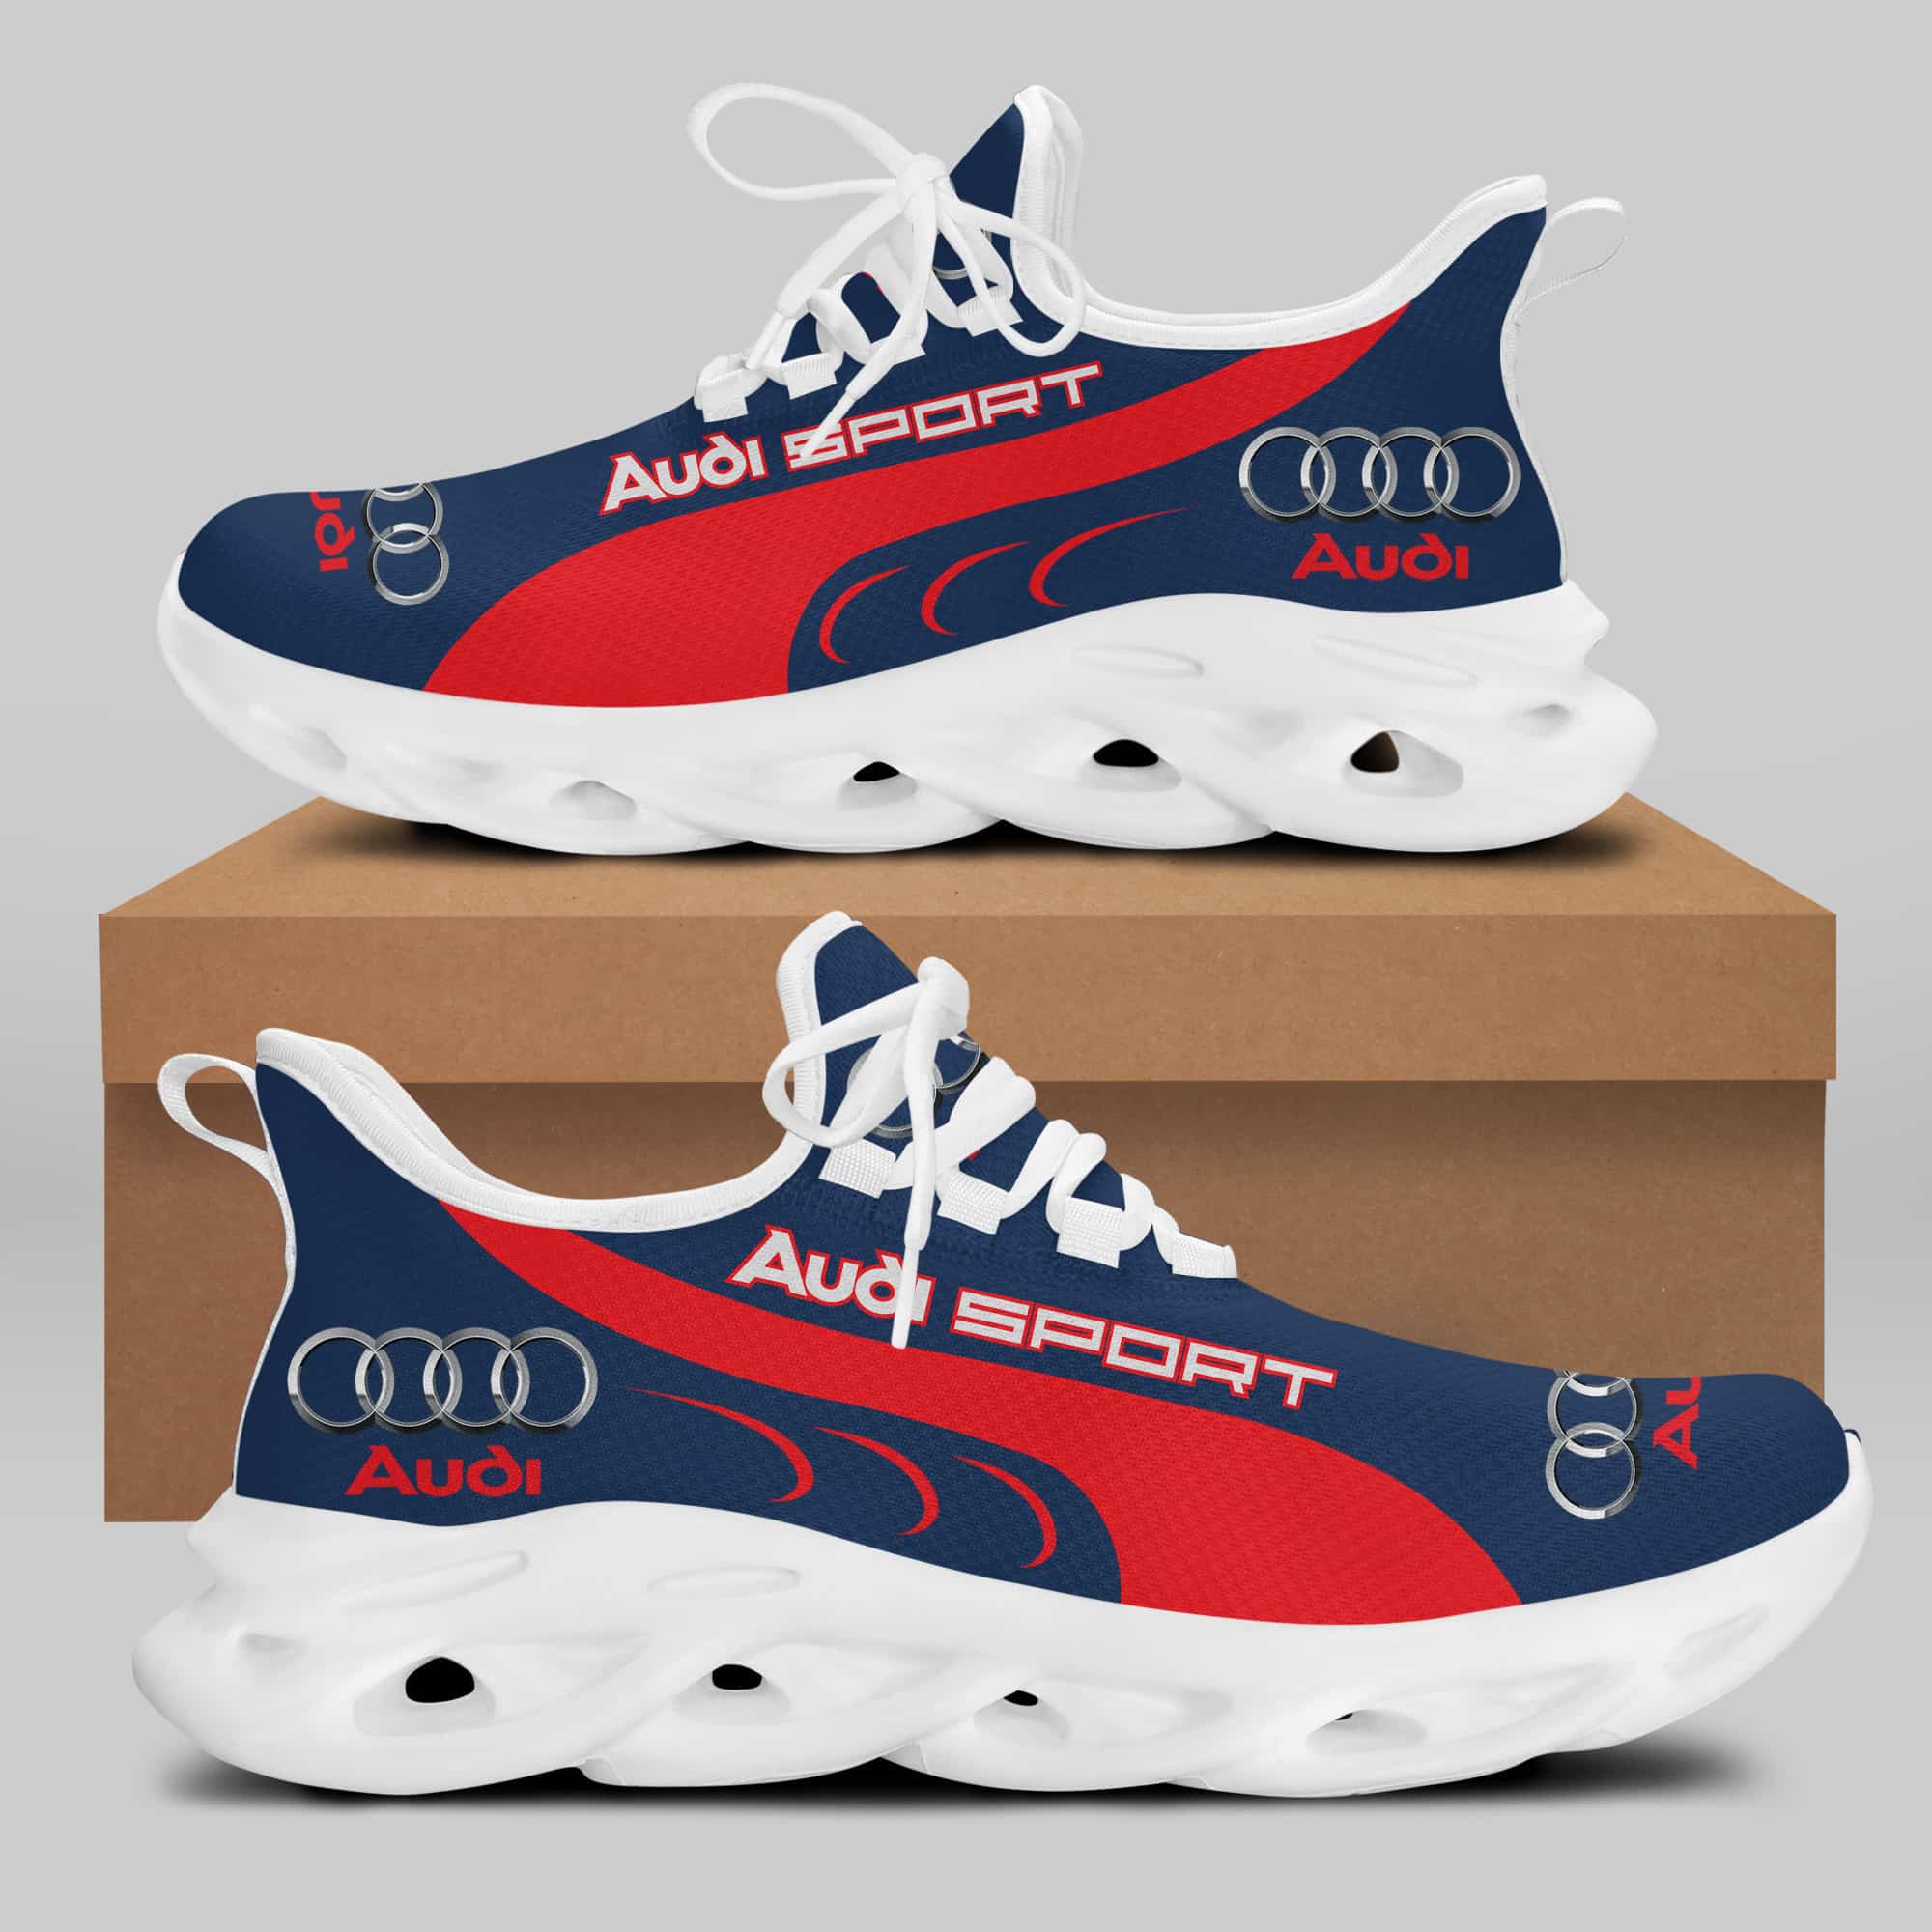 Audi Sport Running Shoes Max Soul Shoes Sneakers Ver 2 2